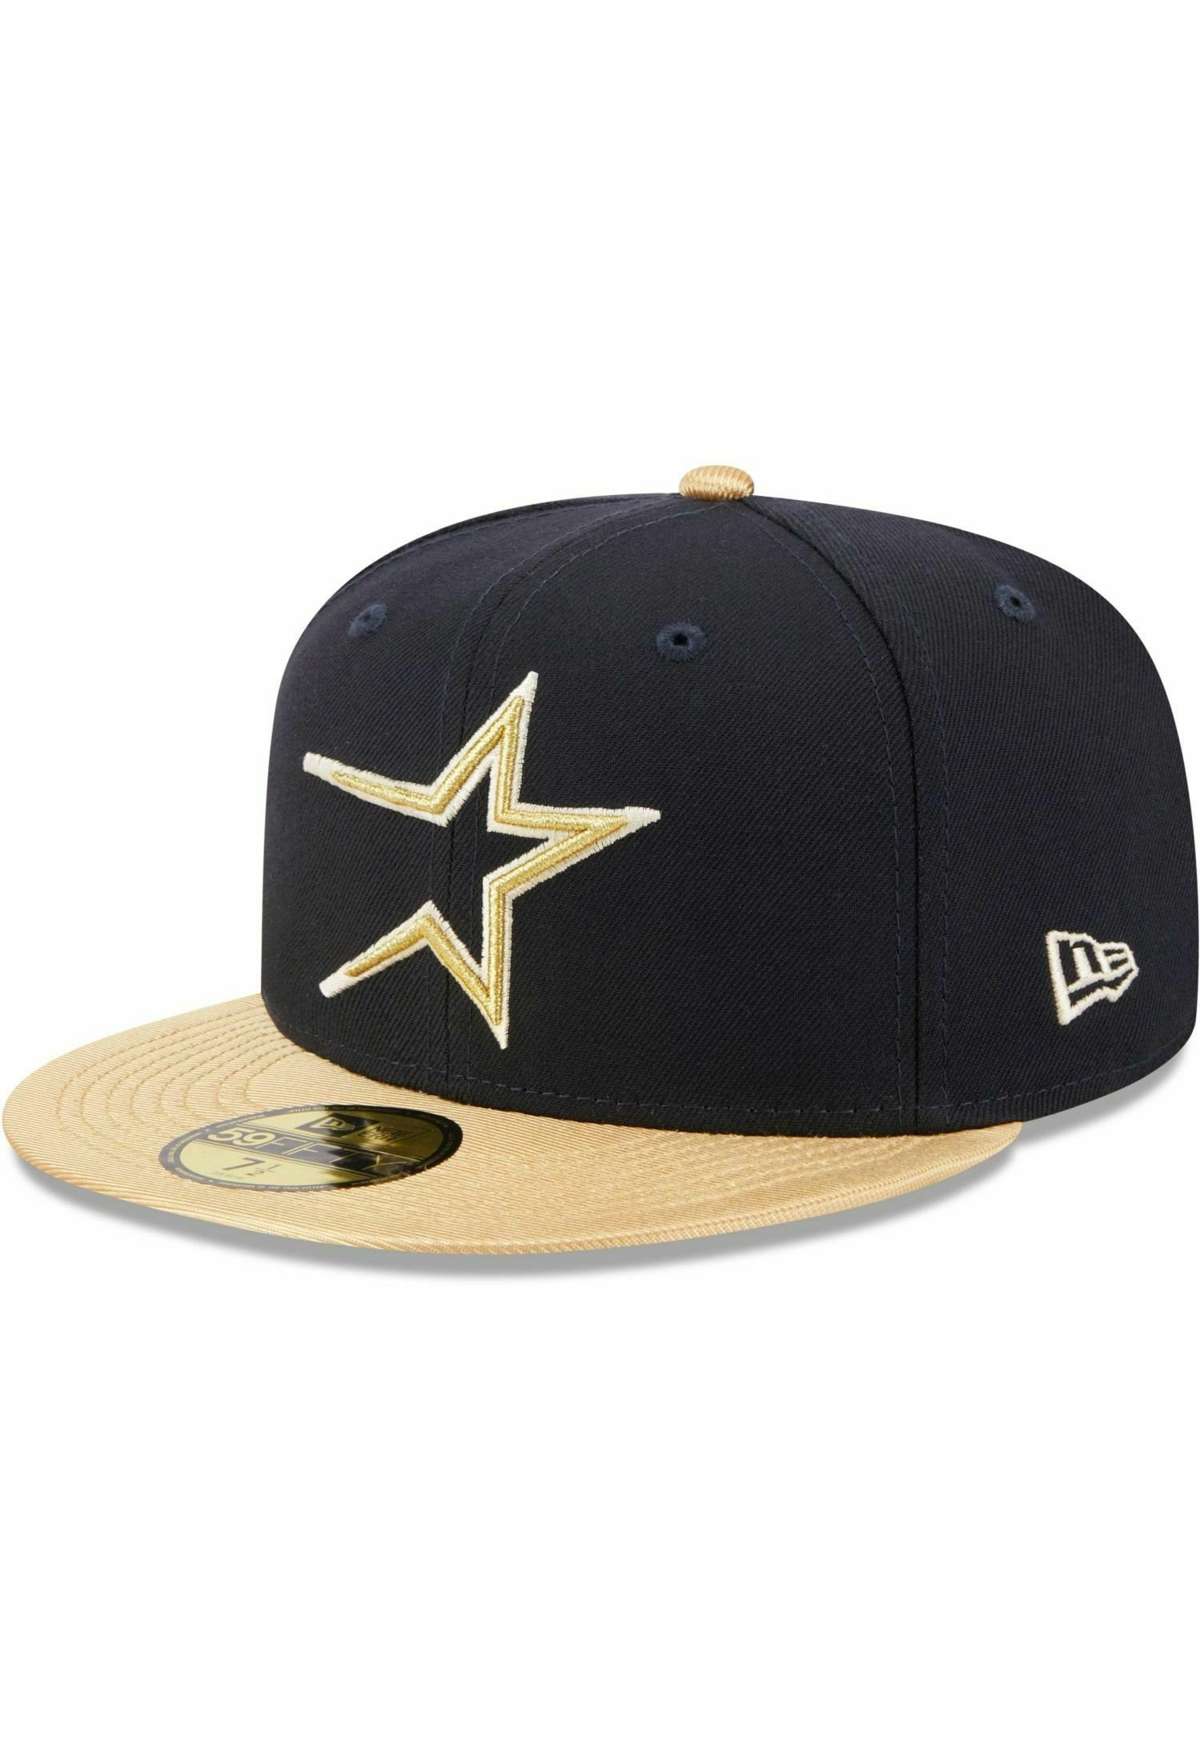 Кепка 59FIFTY SHIMMER HOUSTON ASTROS